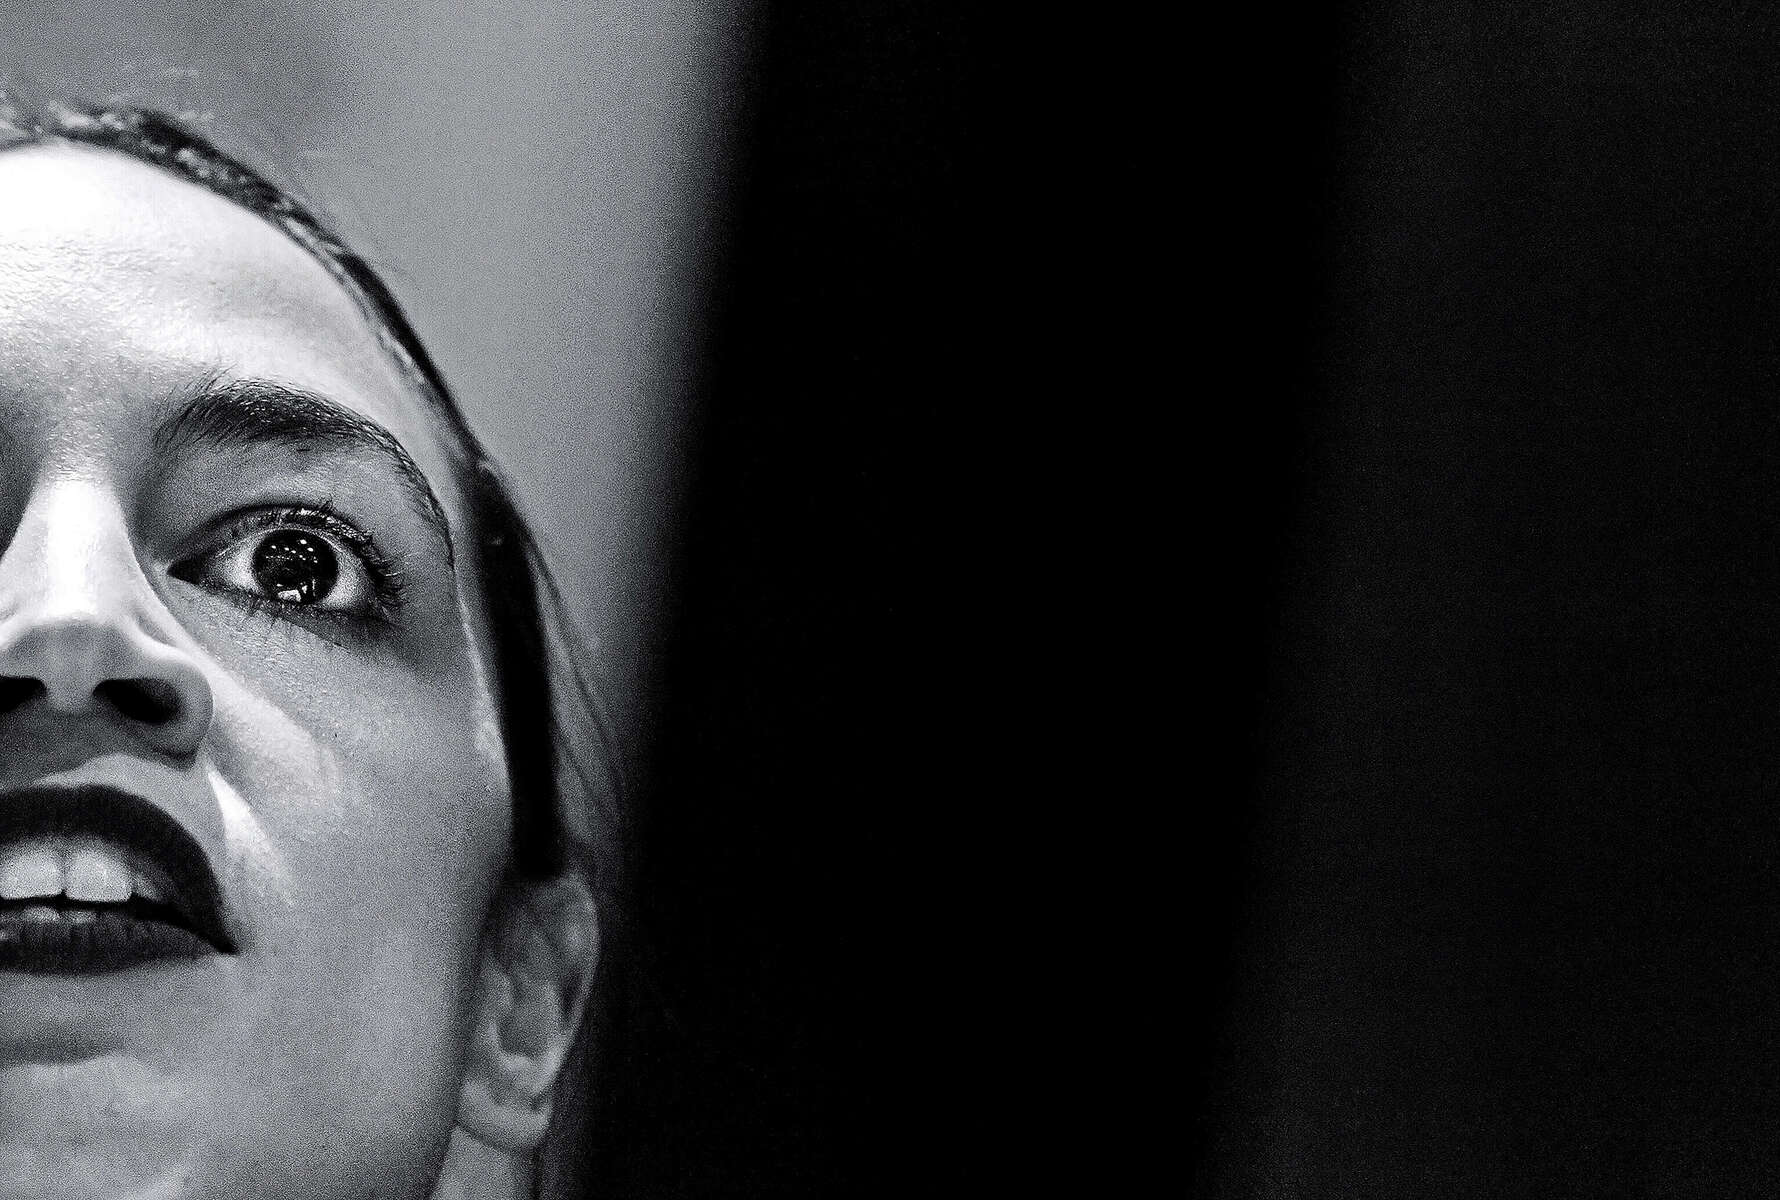 Representative Alexandria Ocasio-Cortez, a Democrat from New York, speaks during a town hall event in the Bronx, NY,  on Wednesday, April 17, 2019. Ocasio-Cortez met with veterans and registered nurses and discussed protecting the U.S. Department of Veterans Affairs health care system from privatization. She endorsed Vermont Senator Bernie Sanders (I-VT) for presidential candidate in October at a rally of 20,000+. (For Bloomberg News)